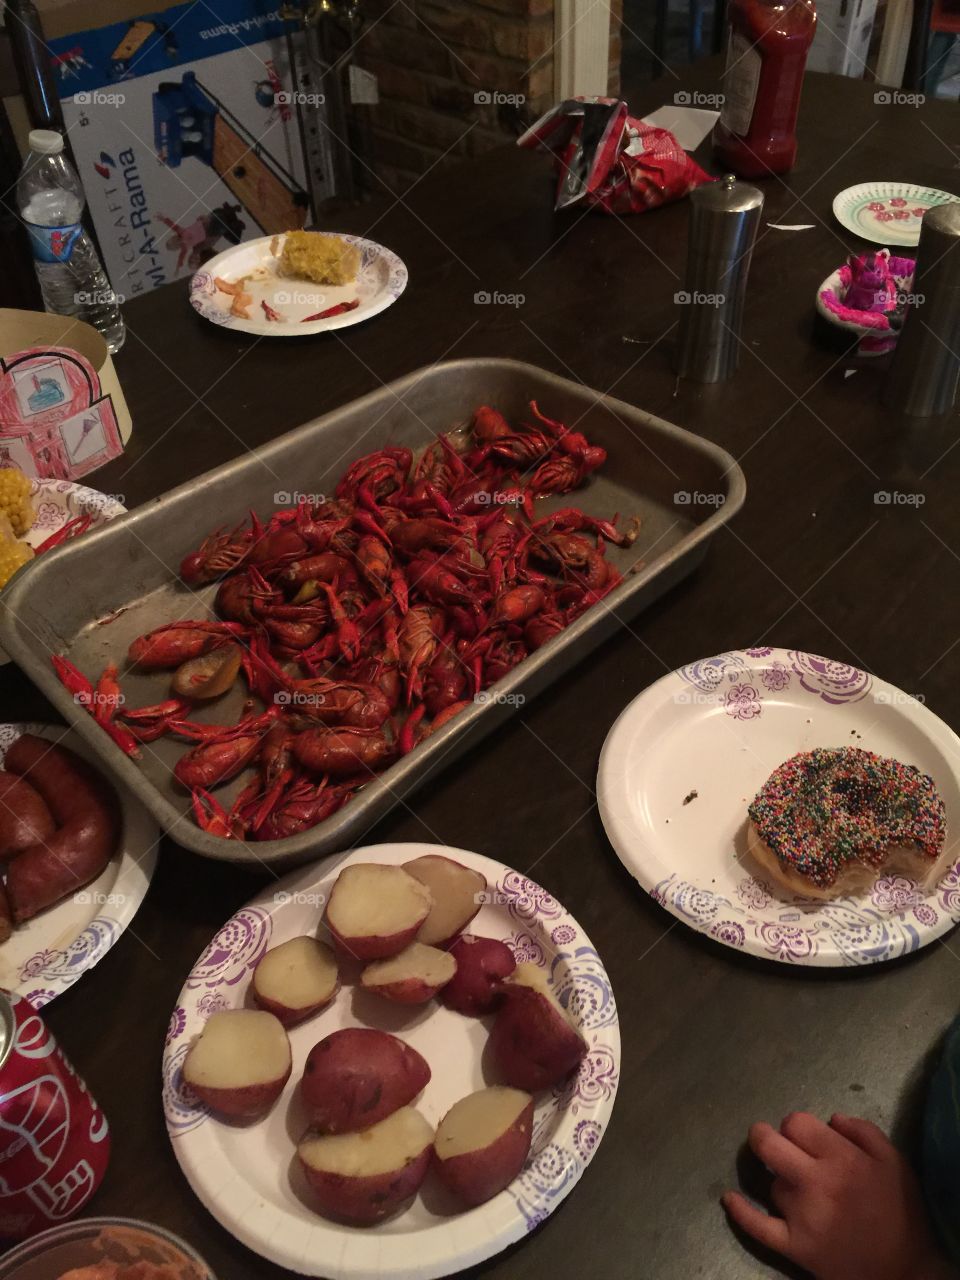 Crawfish and a donut 